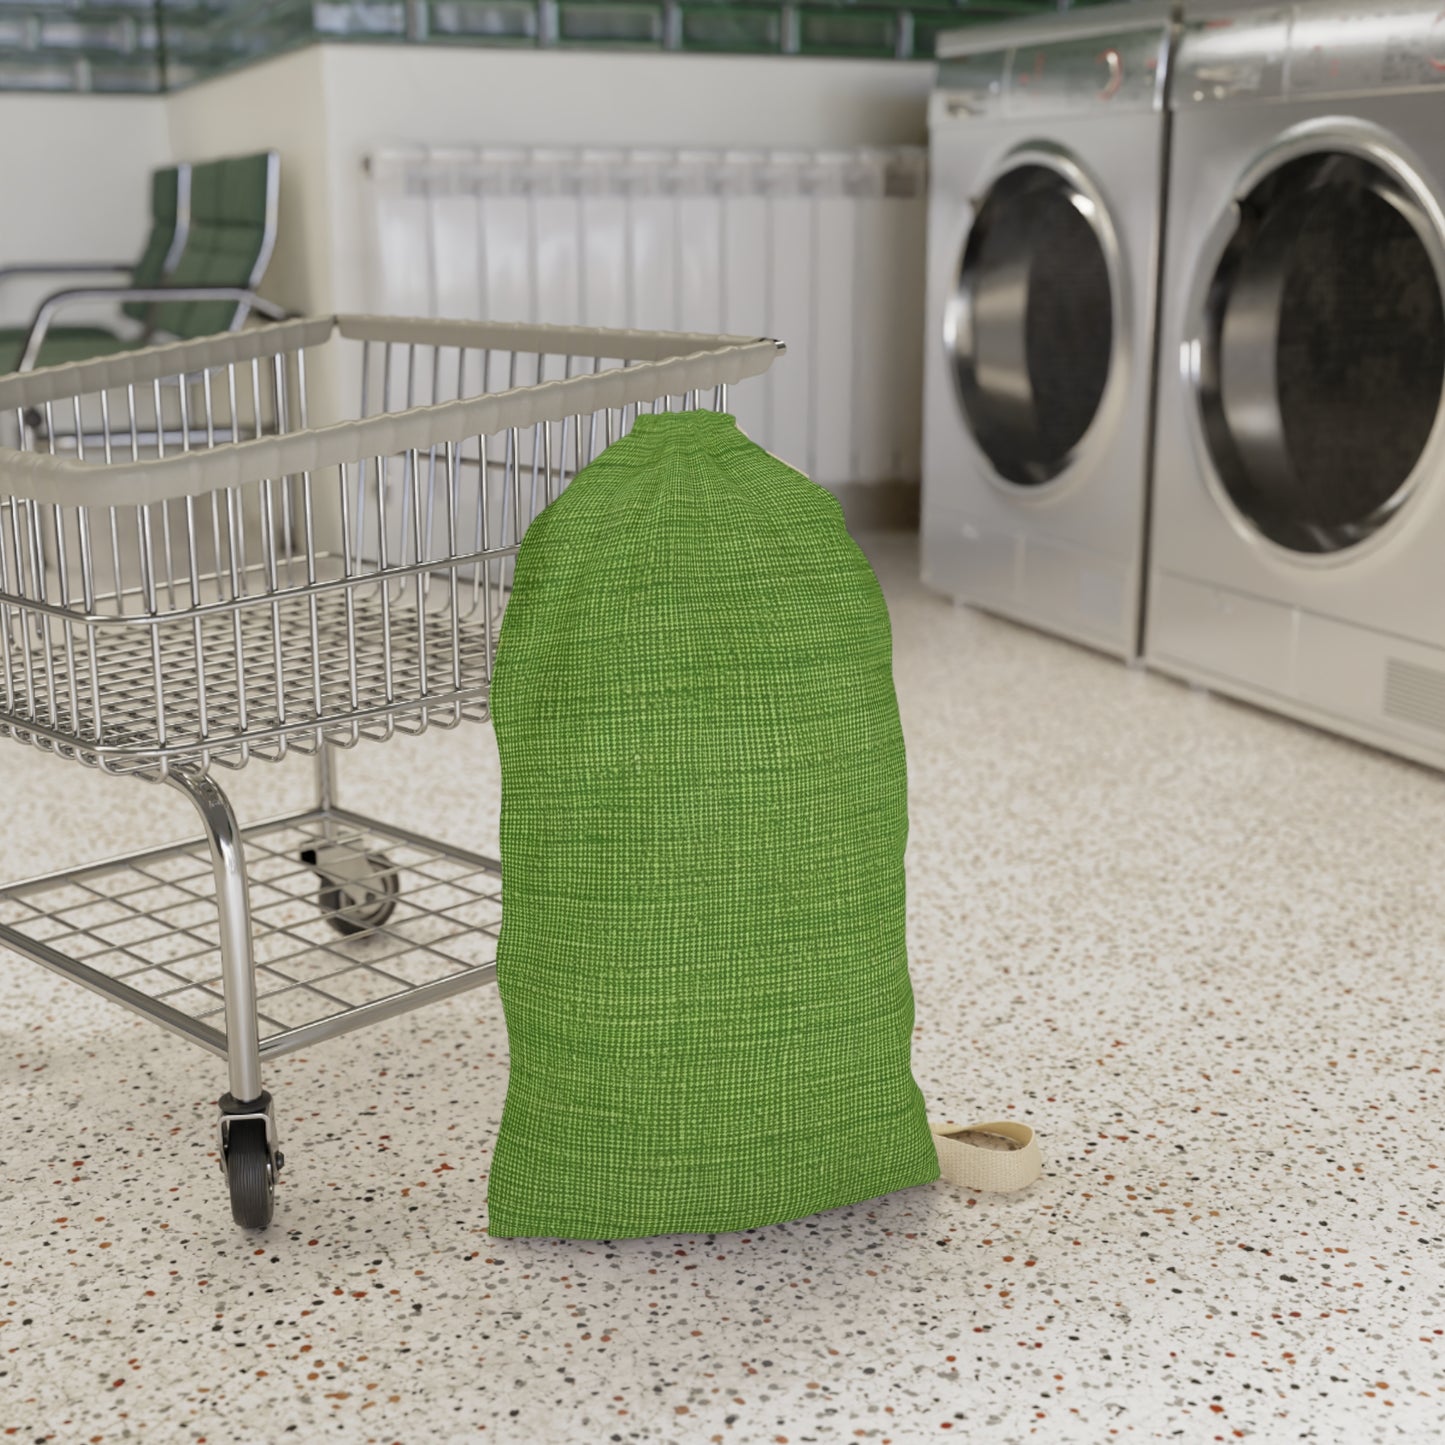 Olive Green Denim-Style: Seamless, Textured Fabric - Laundry Bag